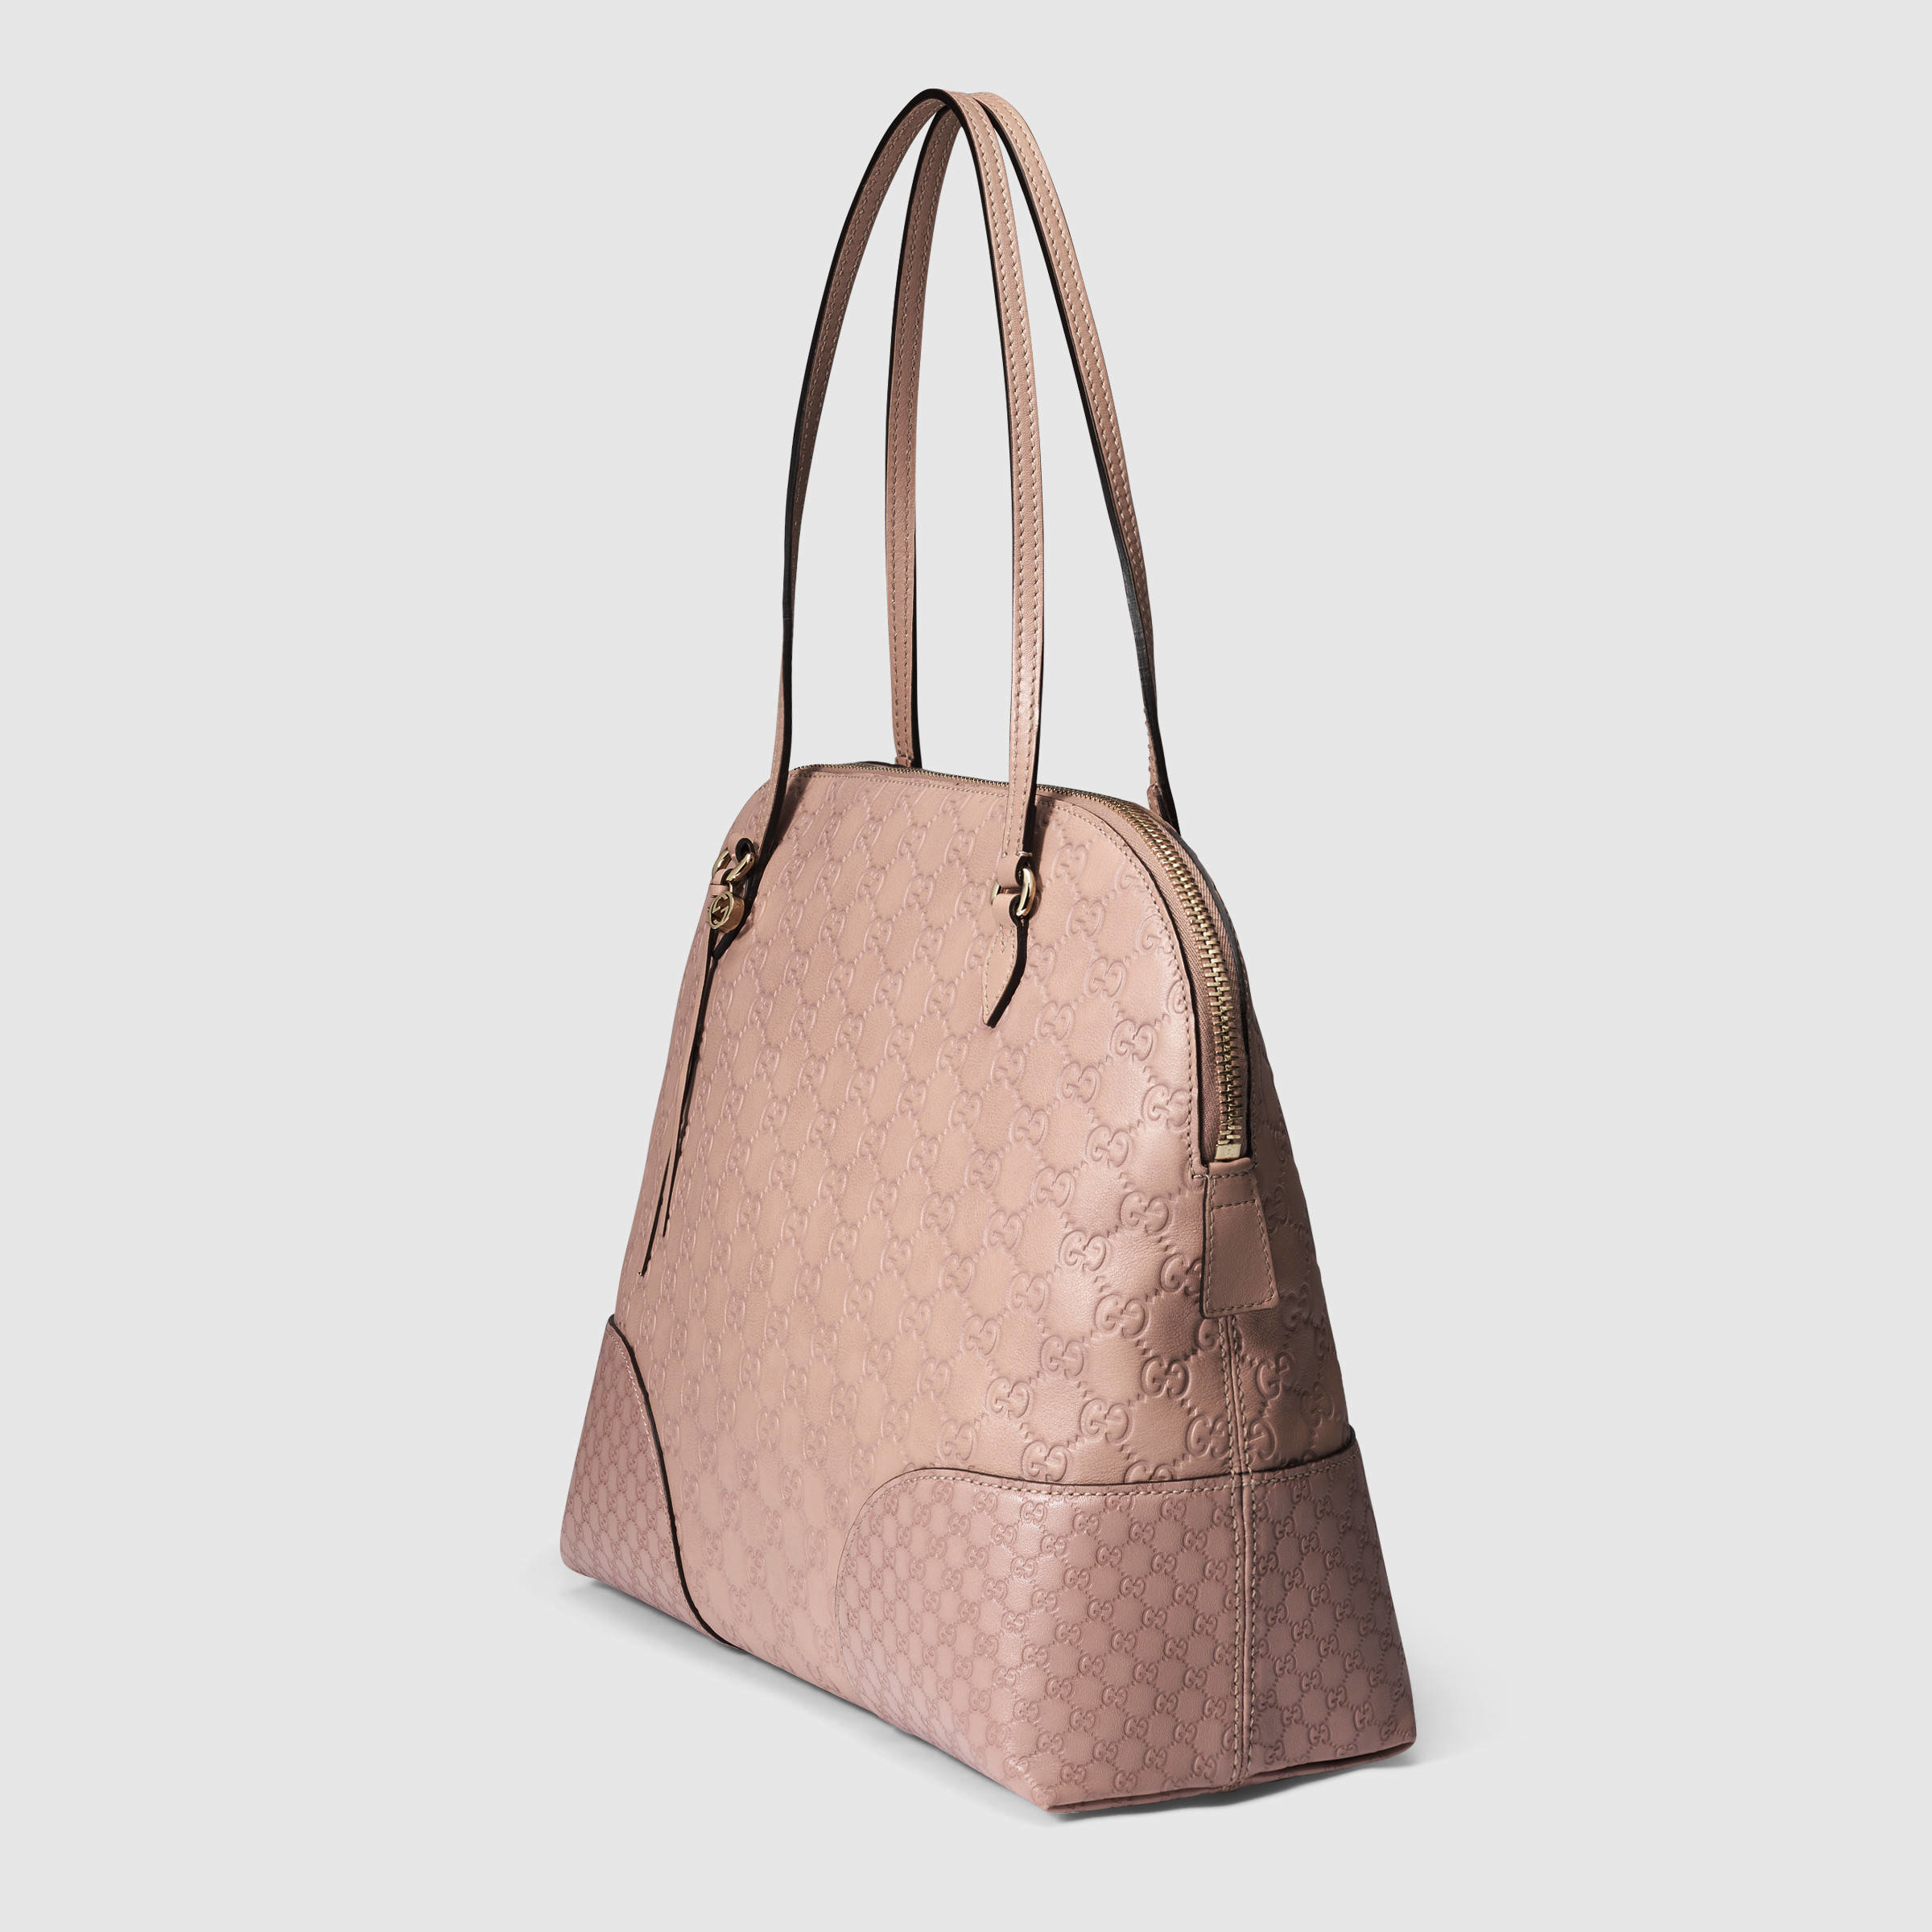 Gucci Bree Guccissima Shoulder Bag in Pink - Lyst